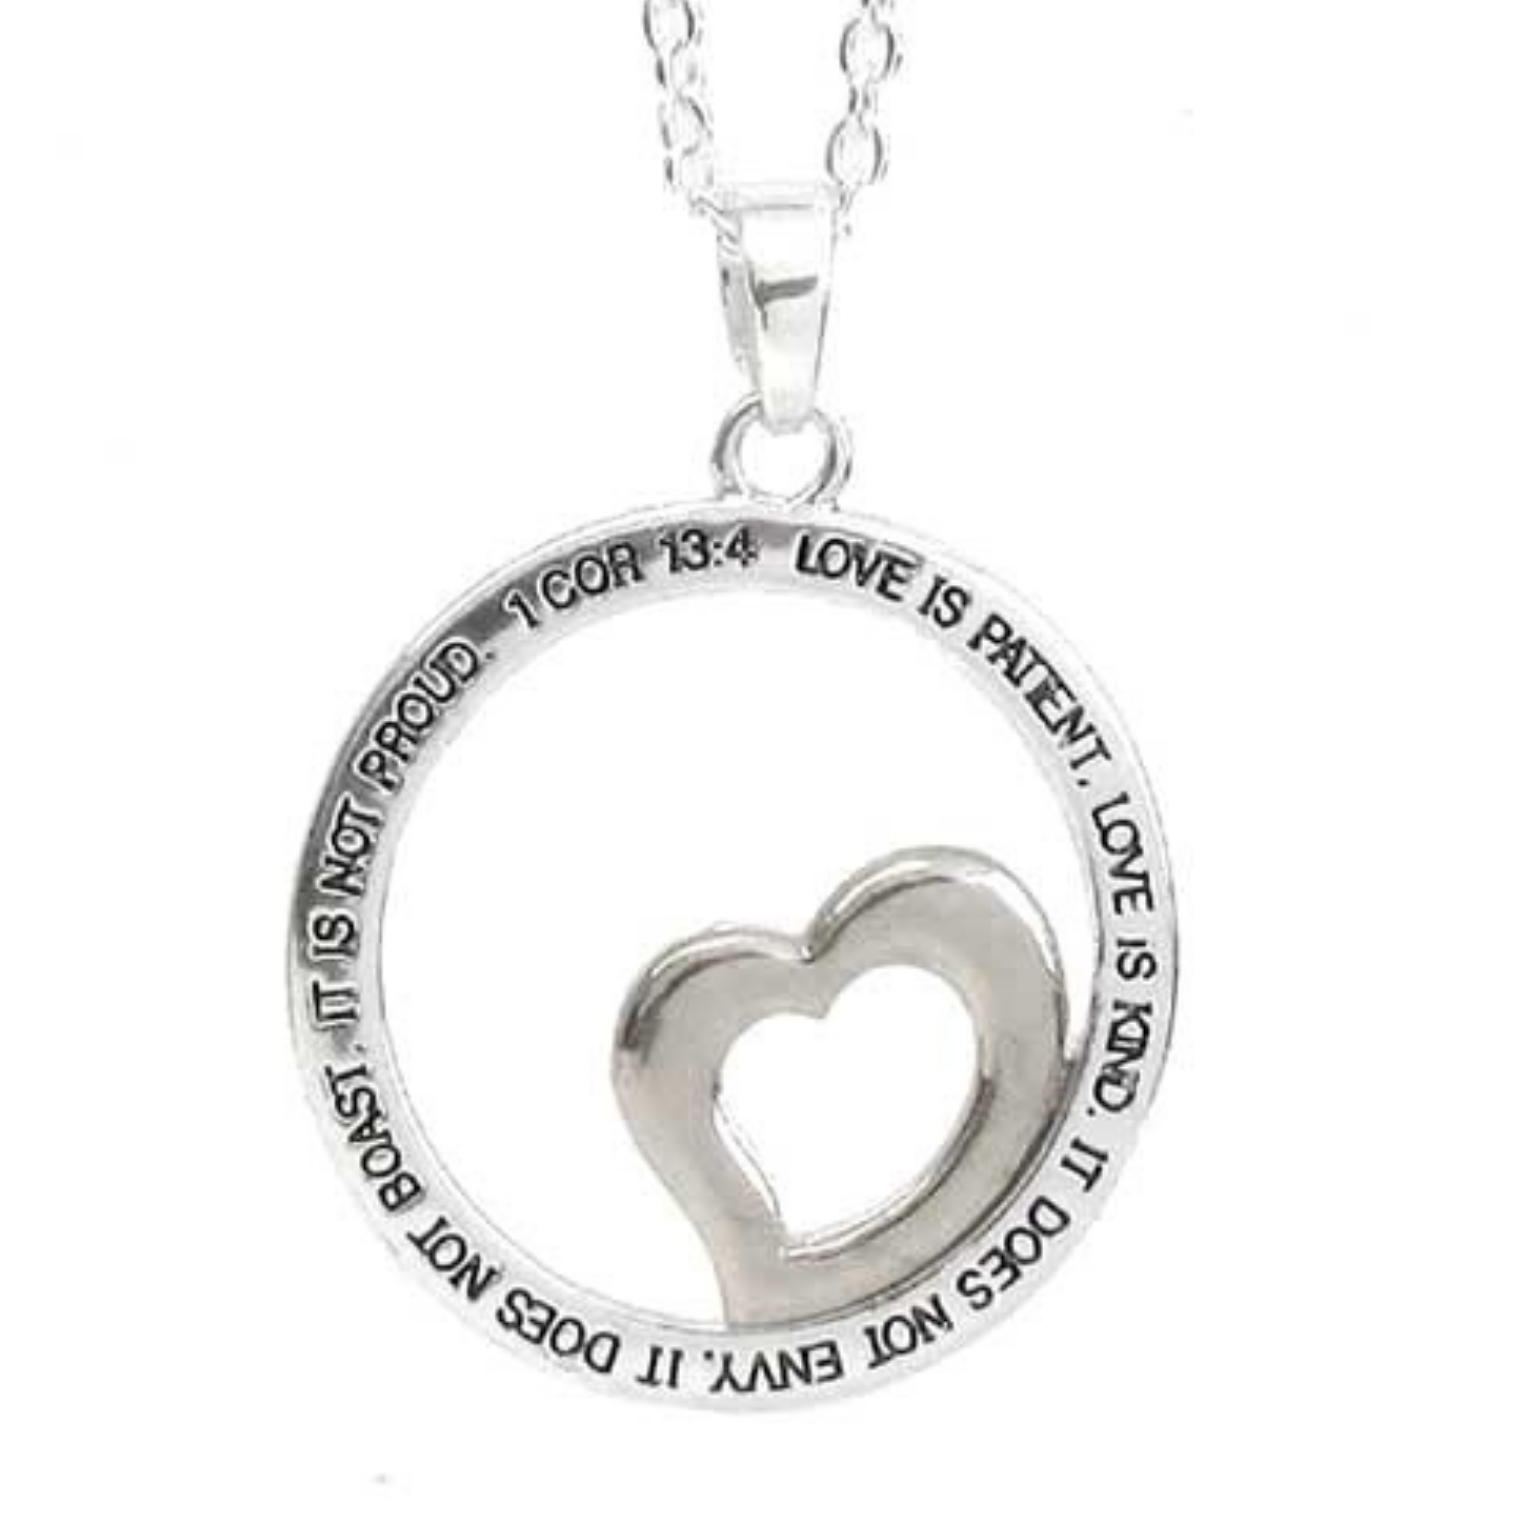 Unbranded - Heart scripture 1 cor 13:4 round pendant necklace silver new